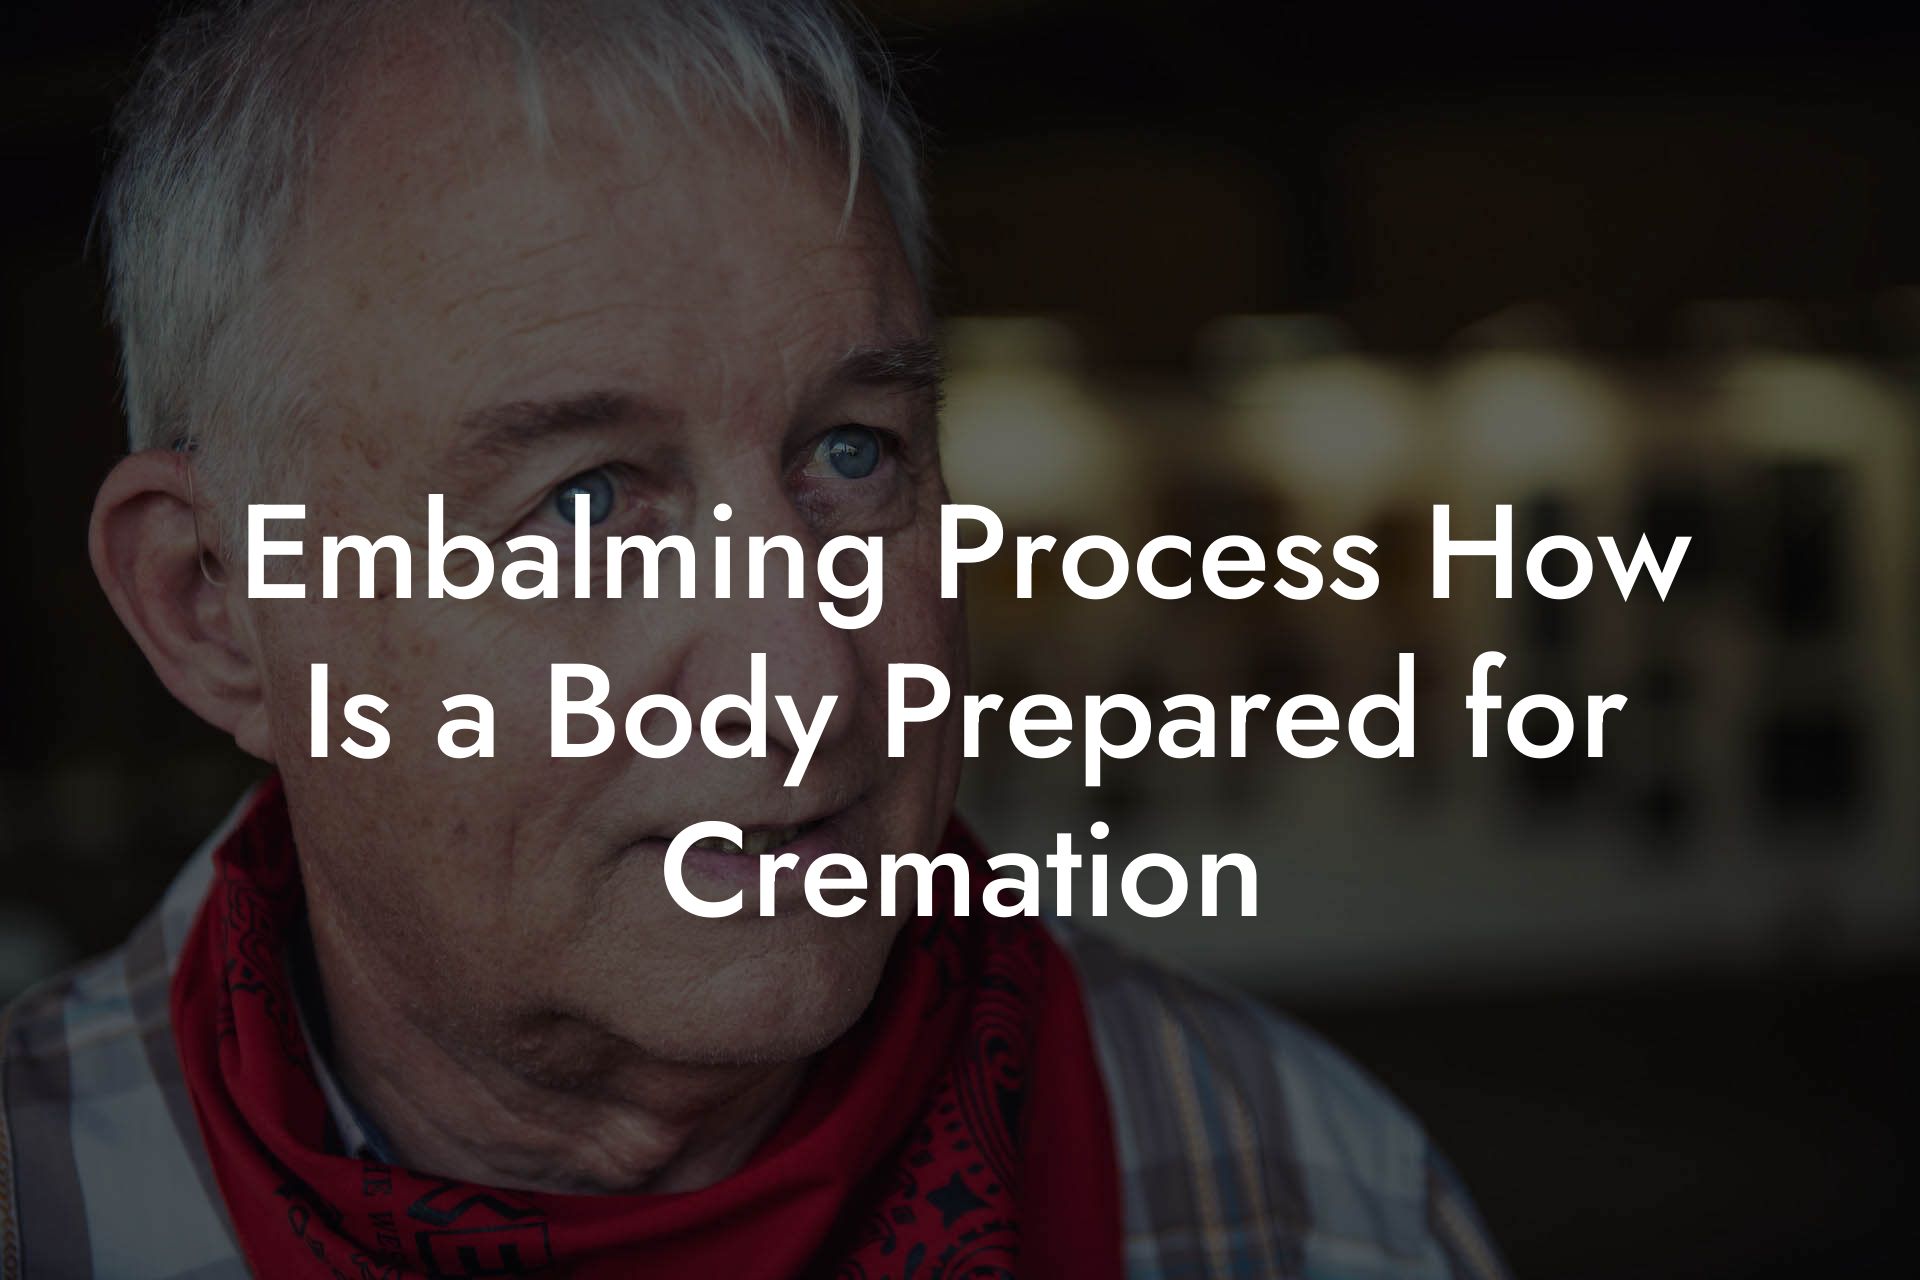 Embalming Process How Is a Body Prepared for Cremation